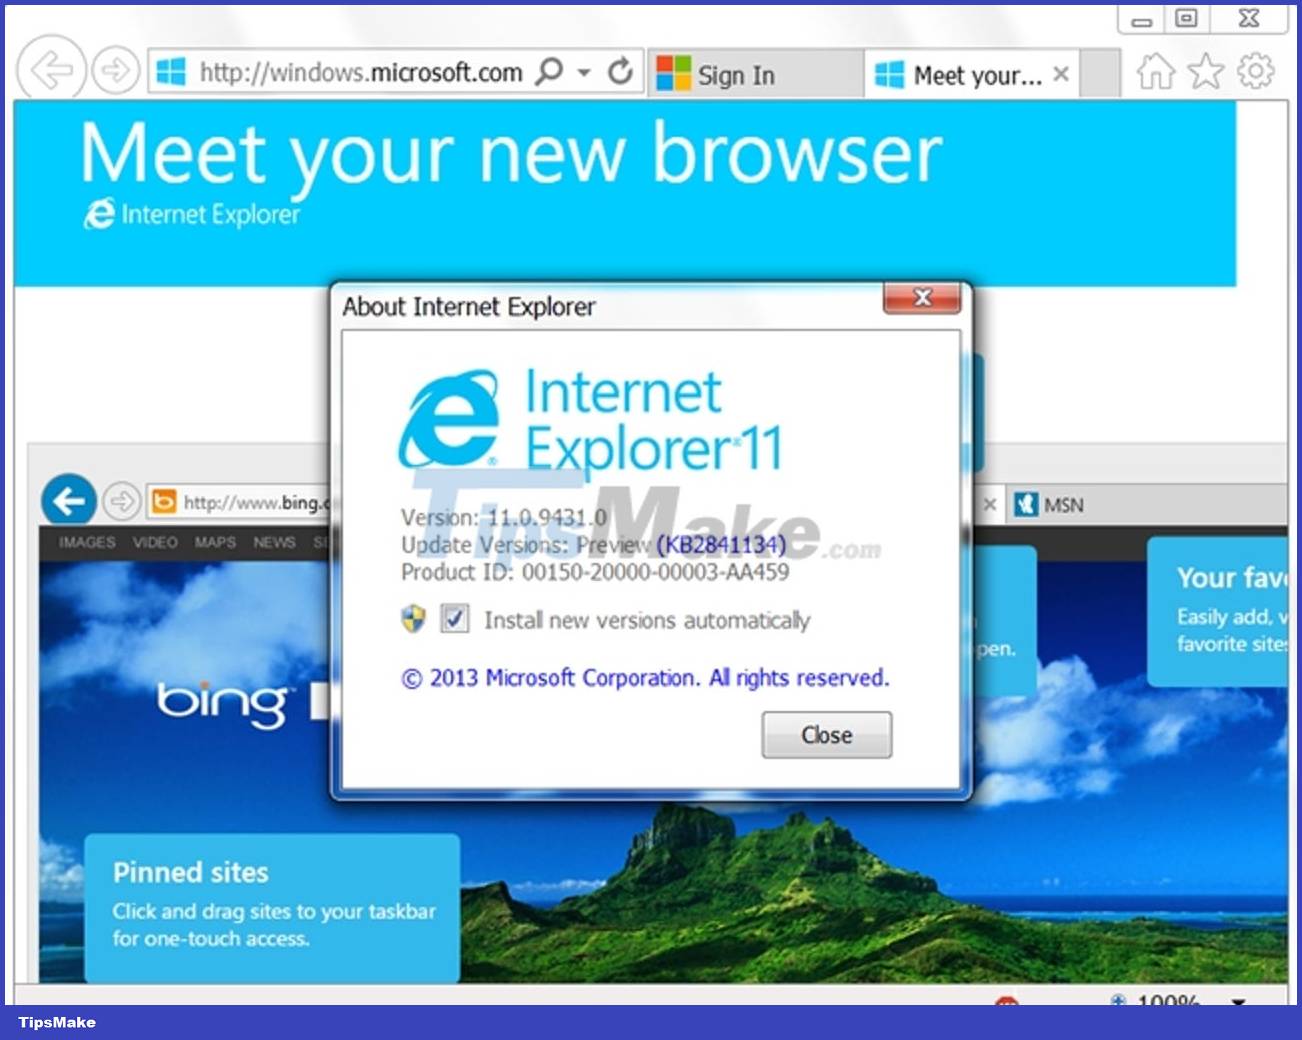 looking-back-at-the-life-full-of-ups-and-downs-of-internet-explorer-picture-12-DFYeNyAhf.jpg